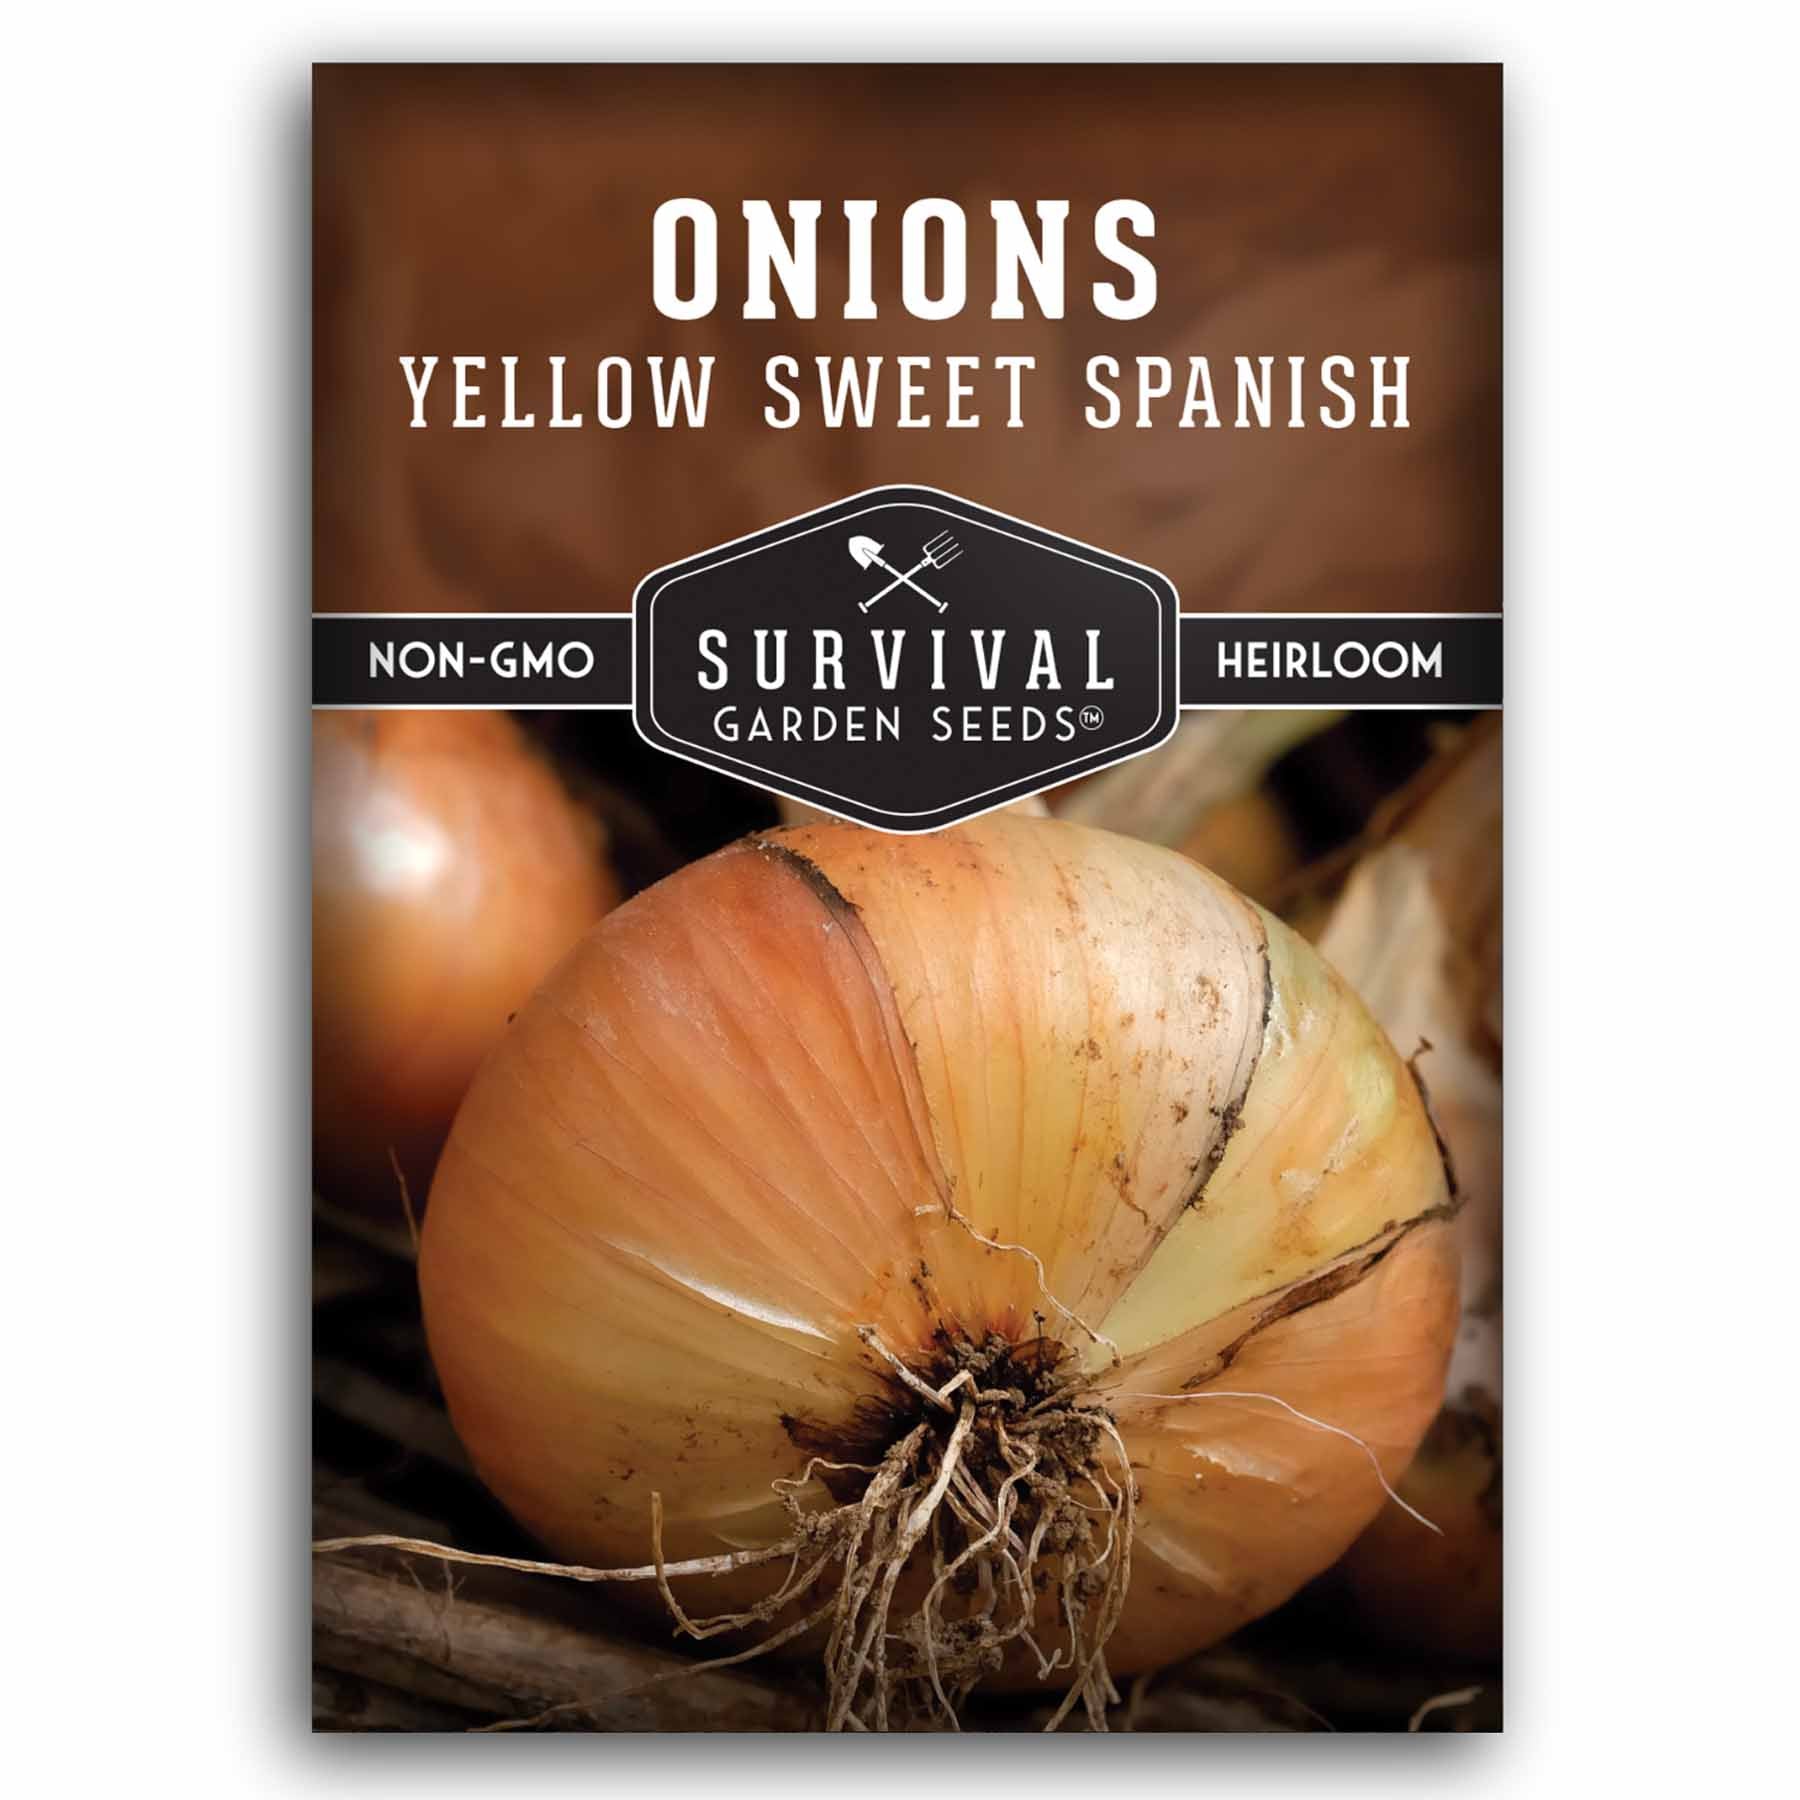 1 packet of Yellow Sweet Spanish Onion seeds